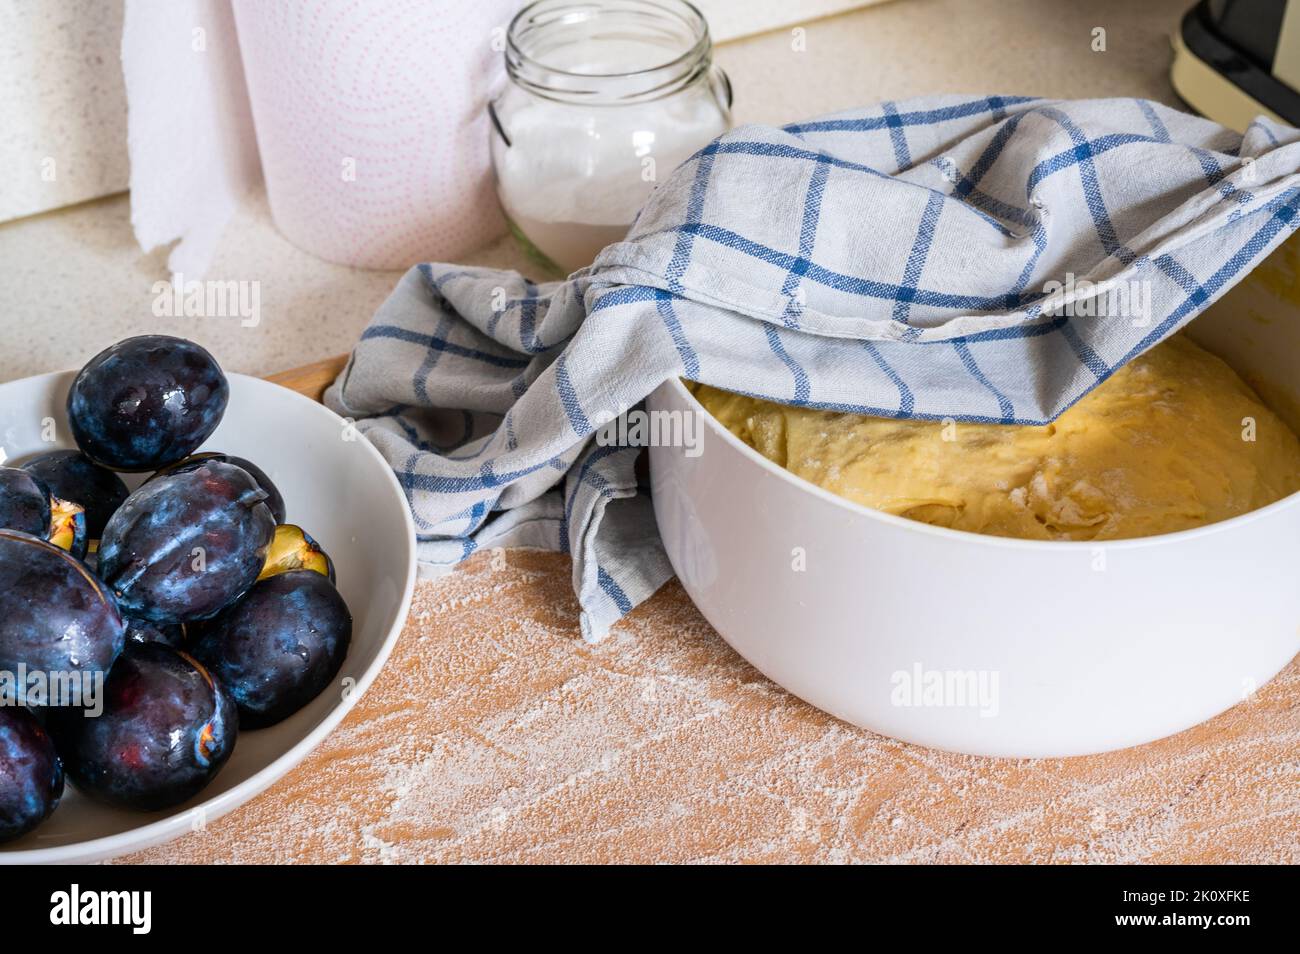 Plum on plate, yeast dough in bowl with towel, glass with sugar and paper kitchen towel on wooden board sprinkled with flour, closeup. Preparing sweet Stock Photo